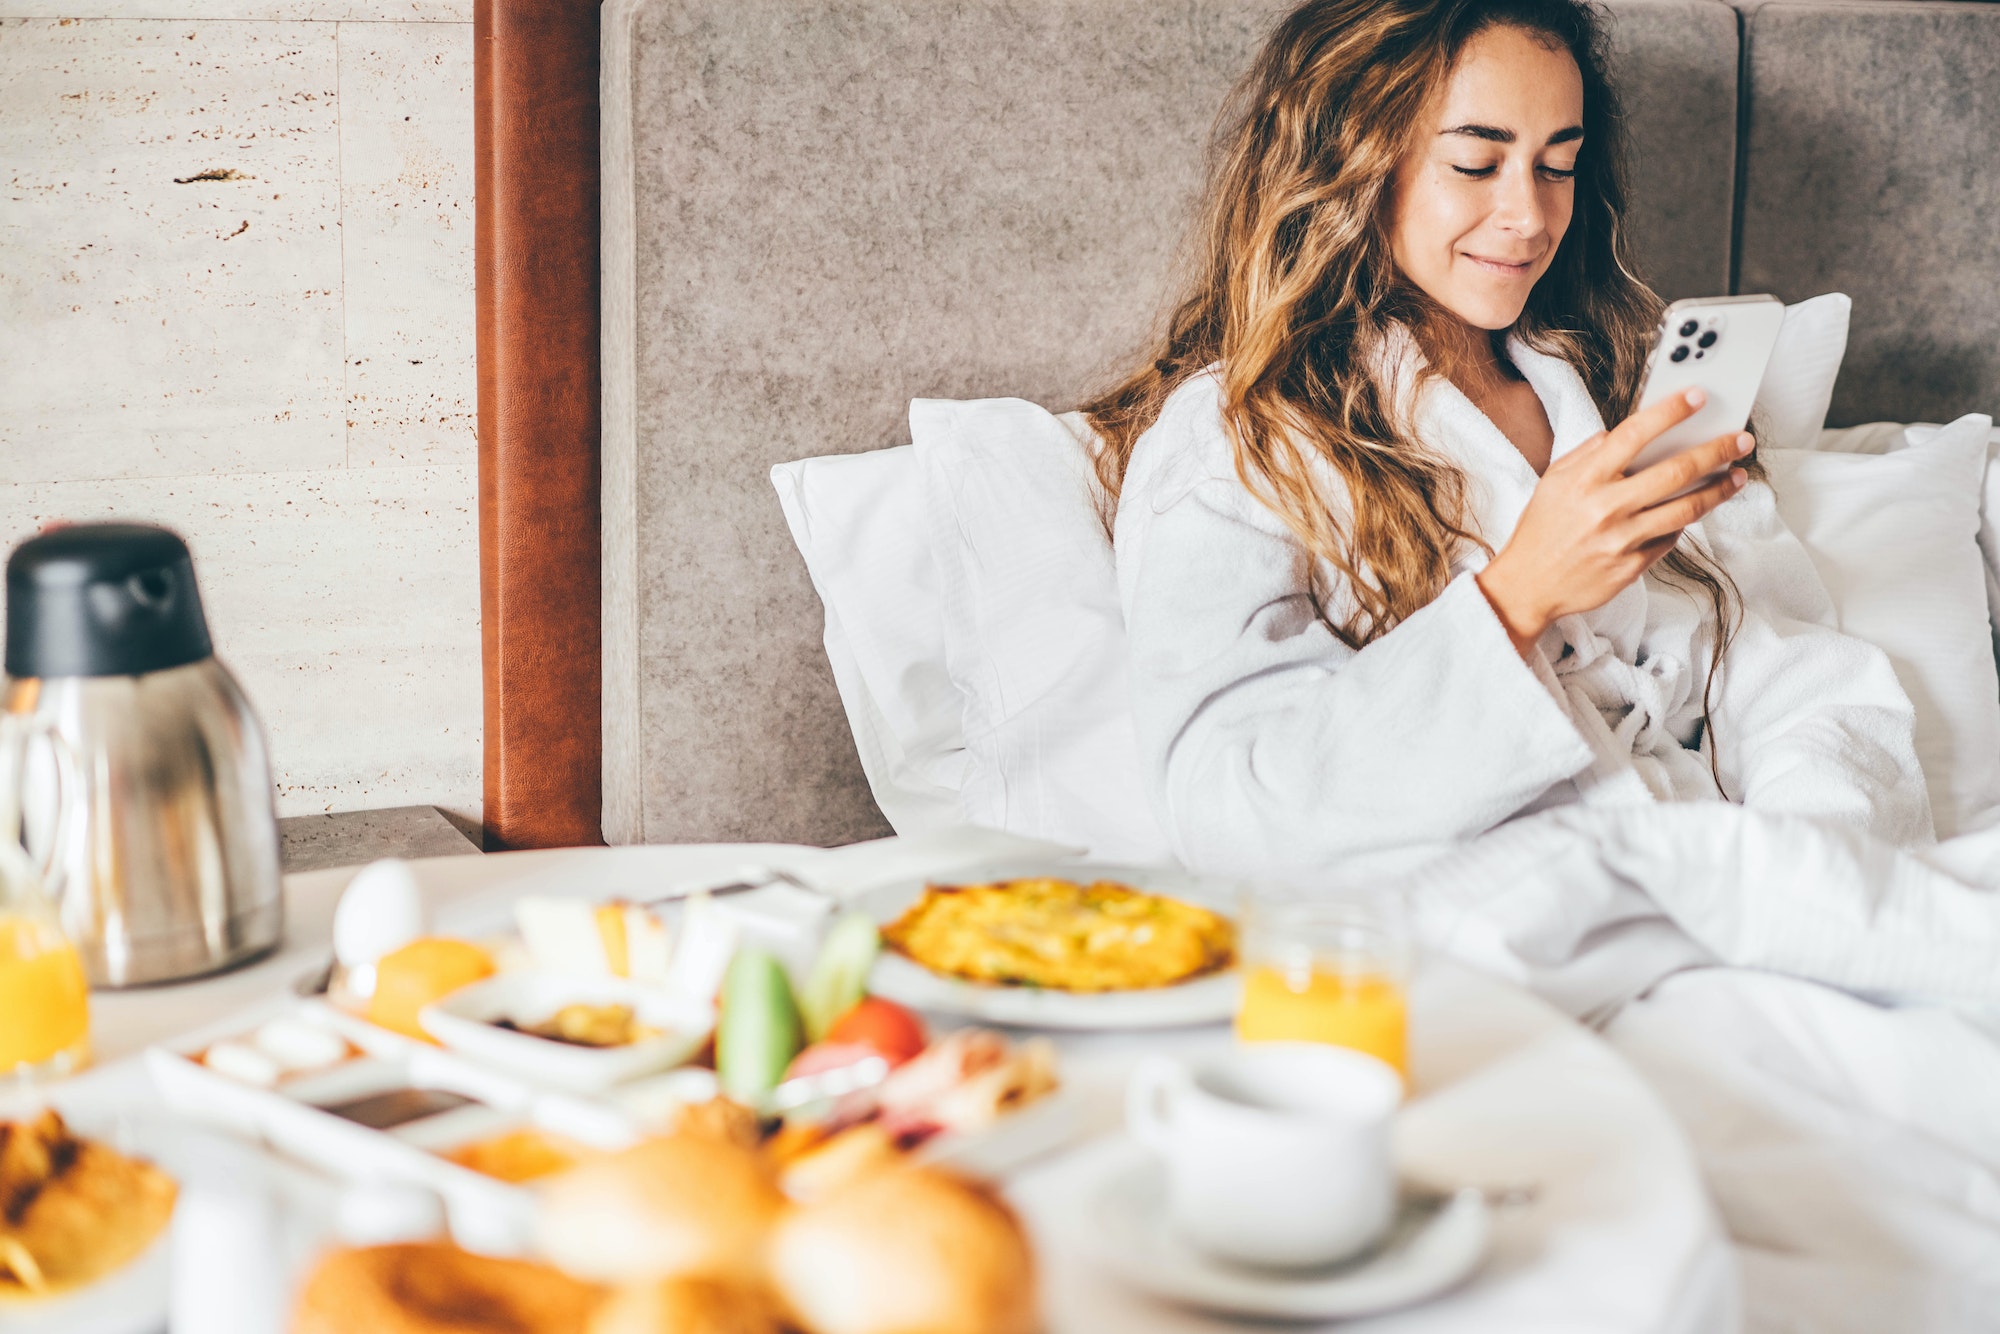 Woman eating breakfast and using phone in the hotel room. Room service breakfast in hotel room.